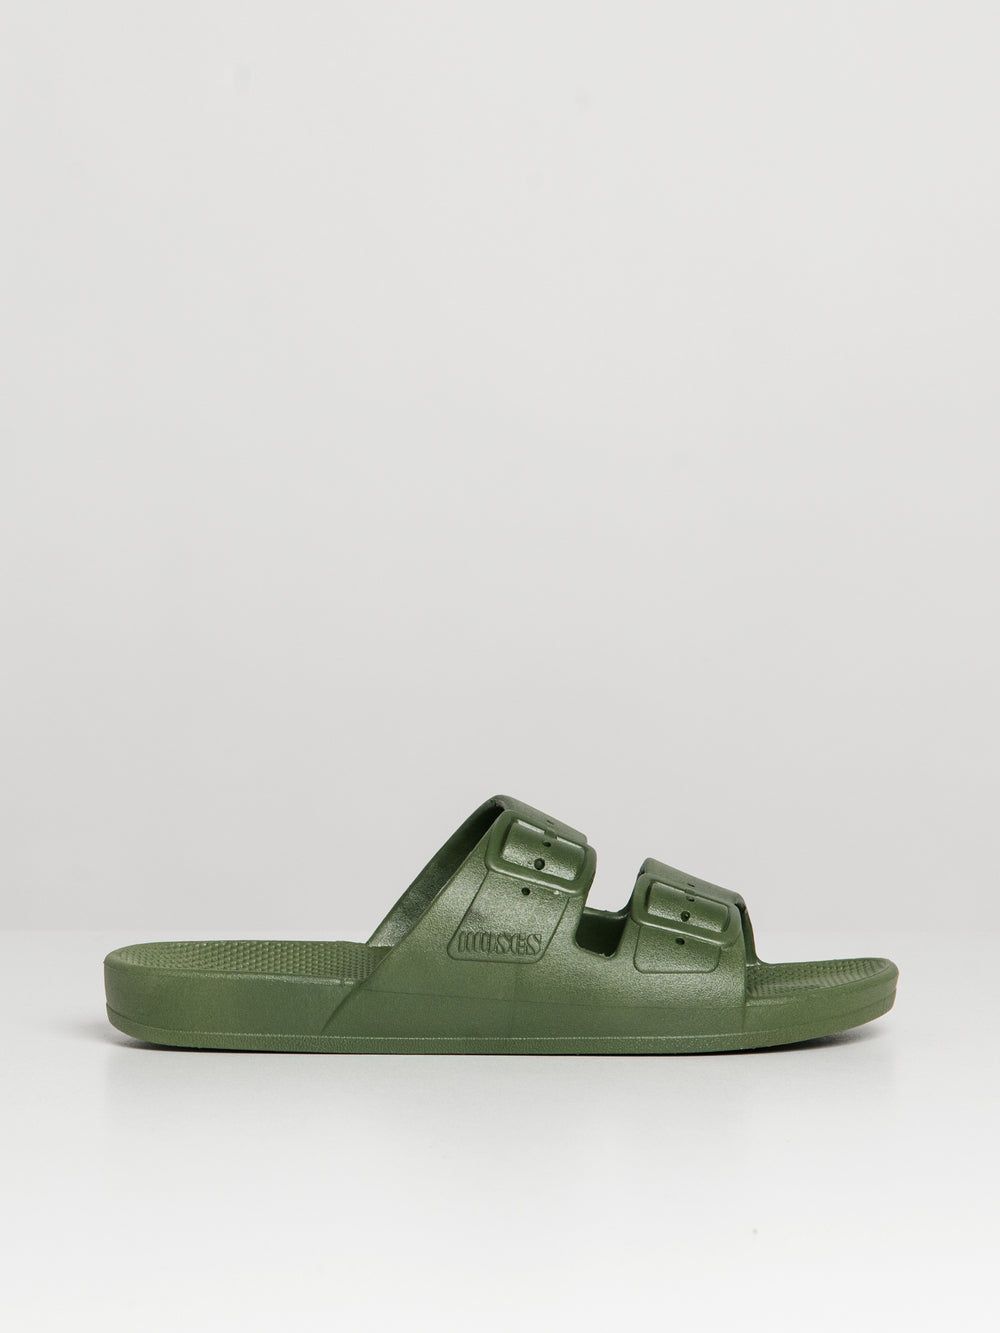 WOMENS FREEDOM MOSES FREEDOM CACTUS SANDAL - CLEARANCE